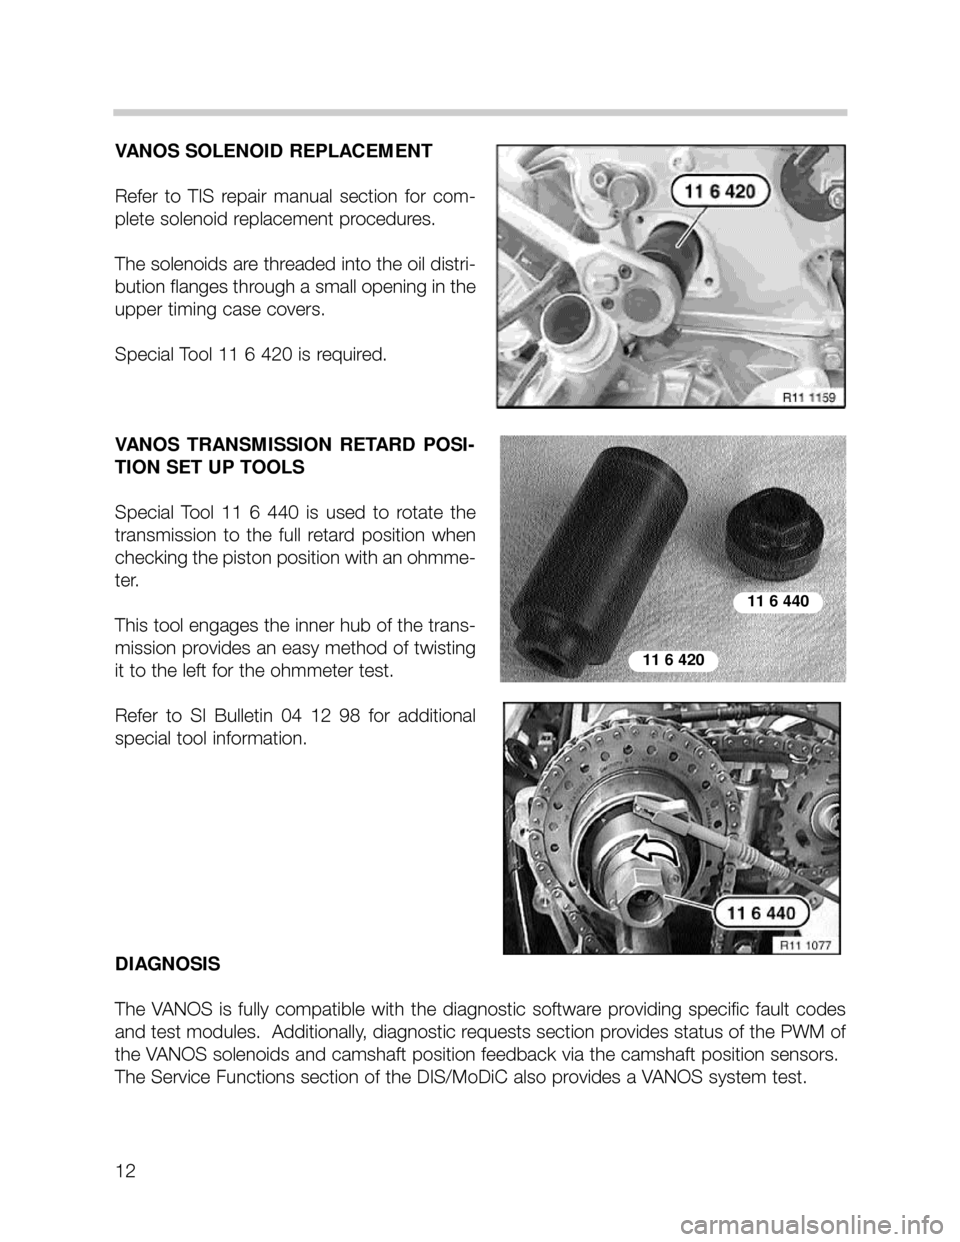 BMW 540i 2001 E39 M62TU Engine Workshop Manual 12
VANOS SOLENOID REPLACEMENT
Refer  to  TIS  repair  manual  section  for  com-
plete solenoid replacement procedures.  
The solenoids are threaded into the oil distri-
bution flanges through a small